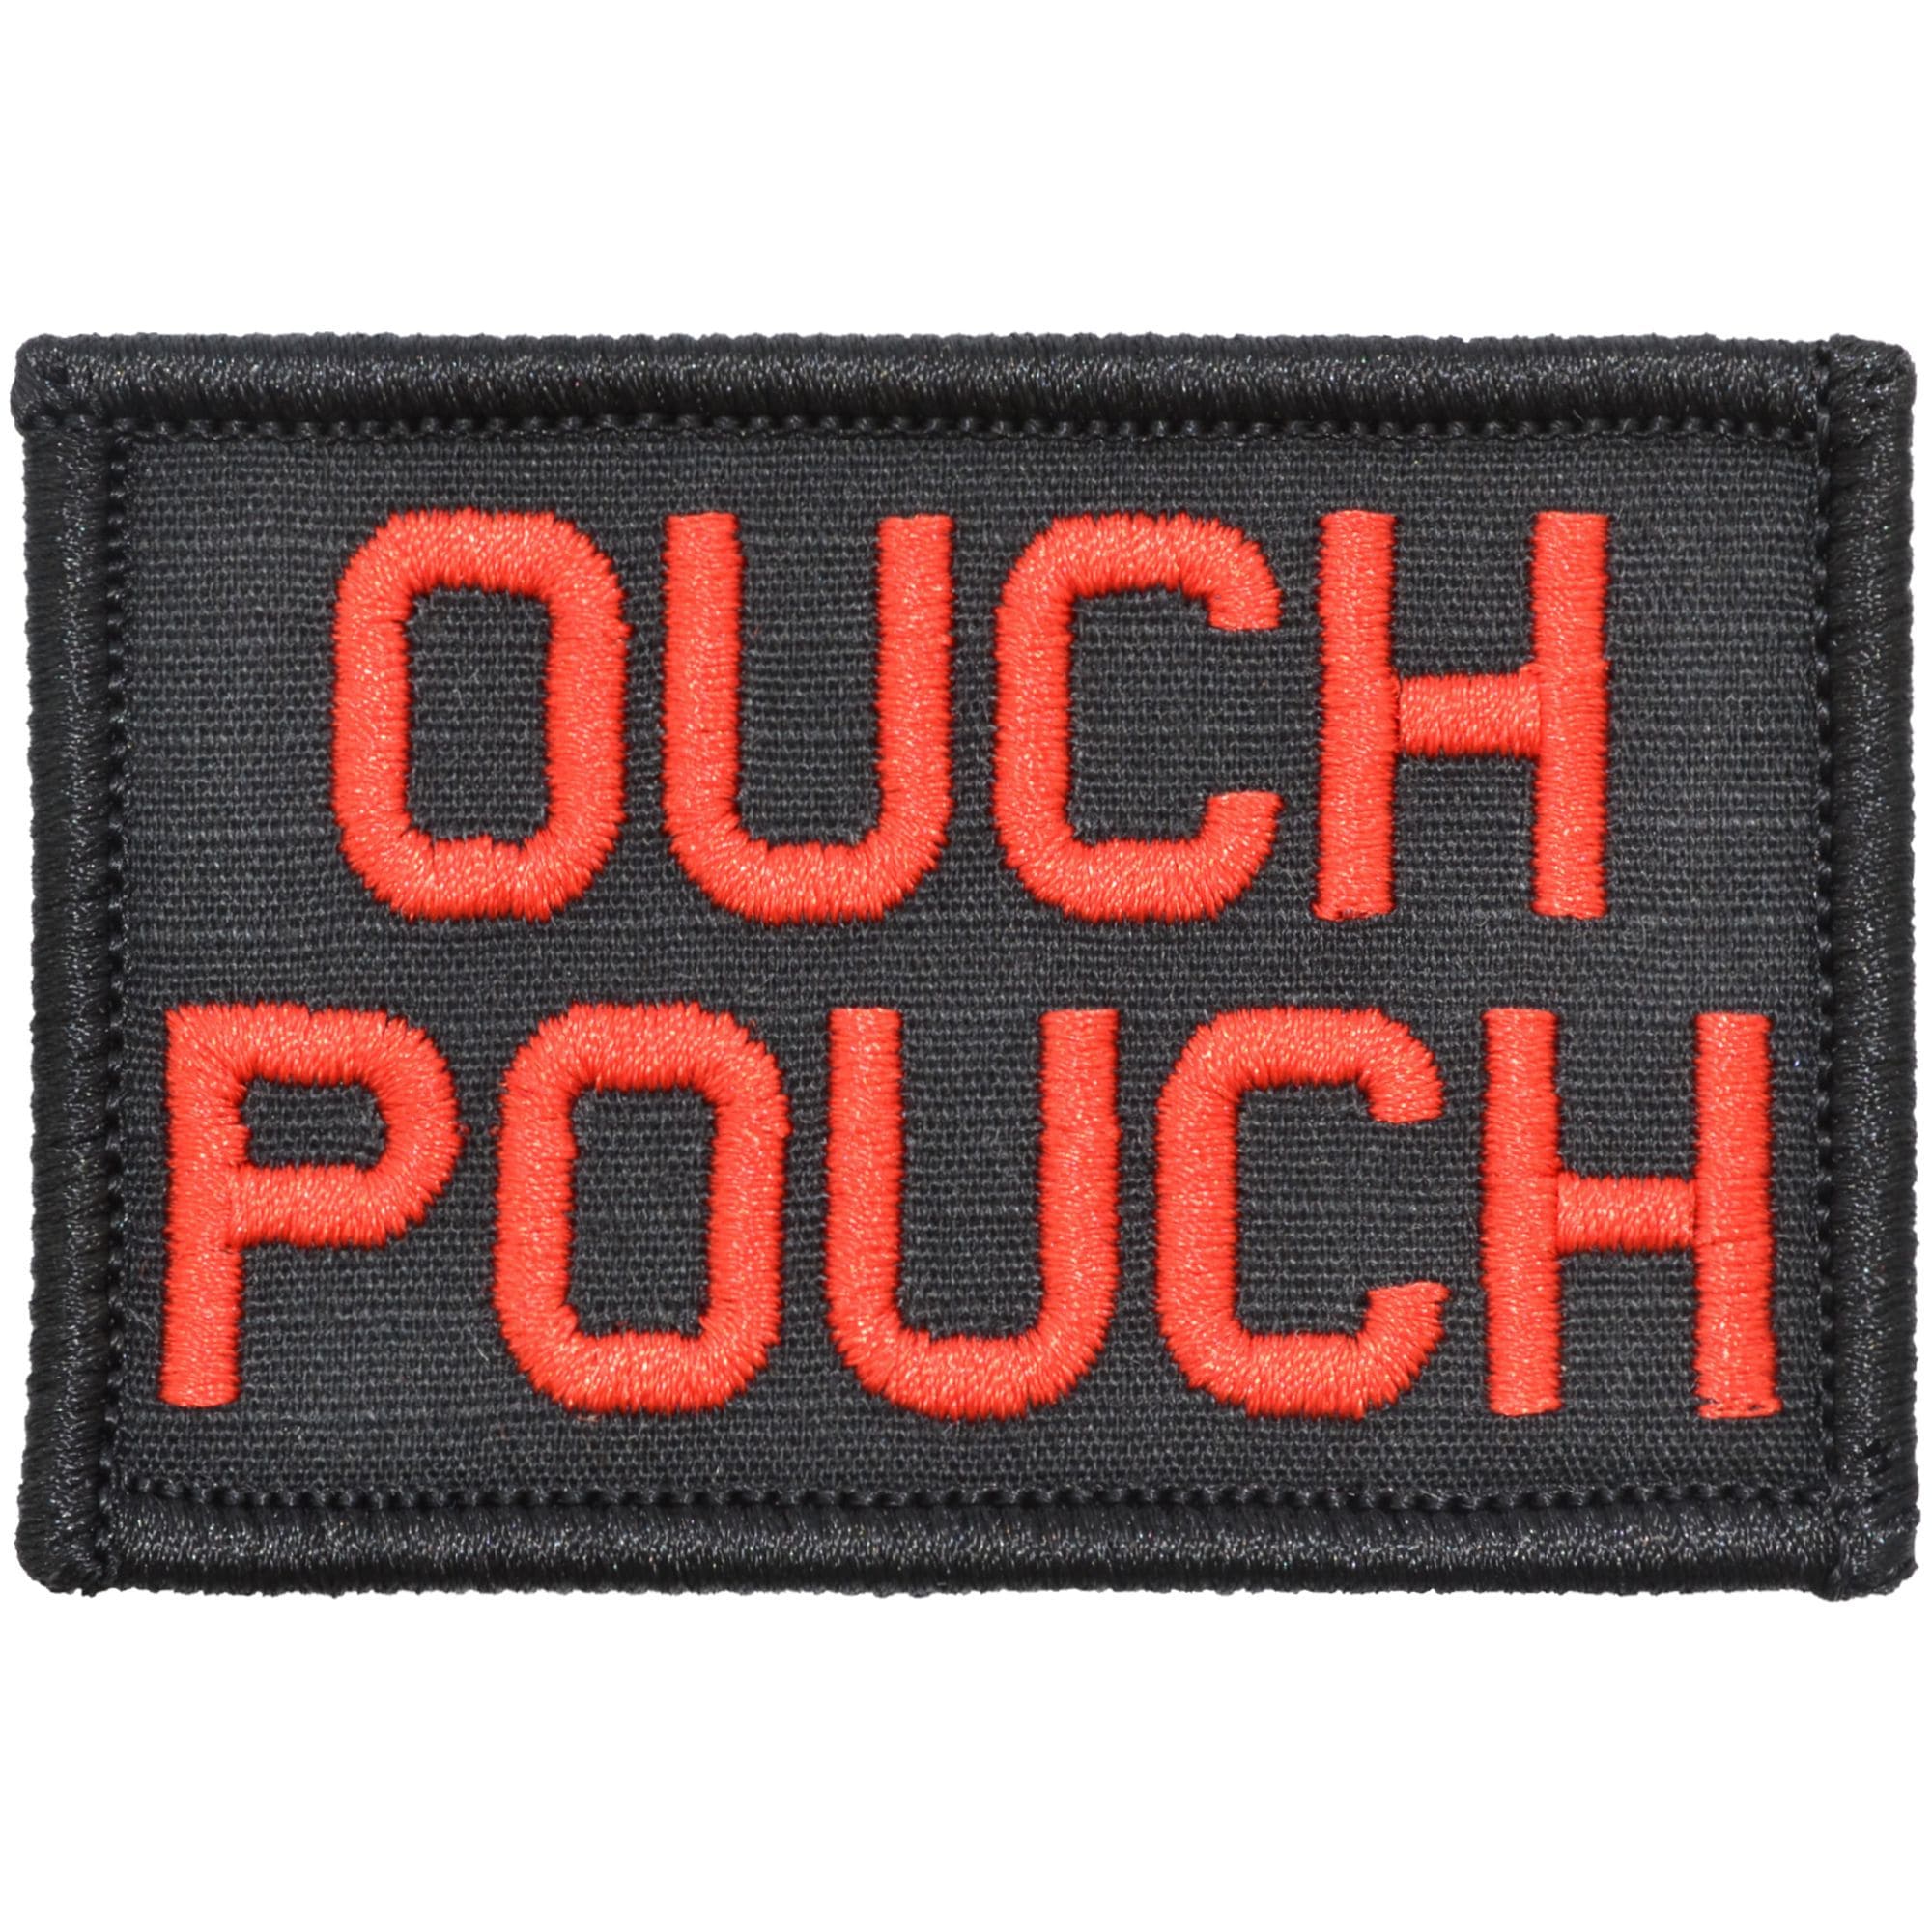 Tactical Gear Junkie Patches Black w/ Red Ouch Pouch - 2x3 Patch